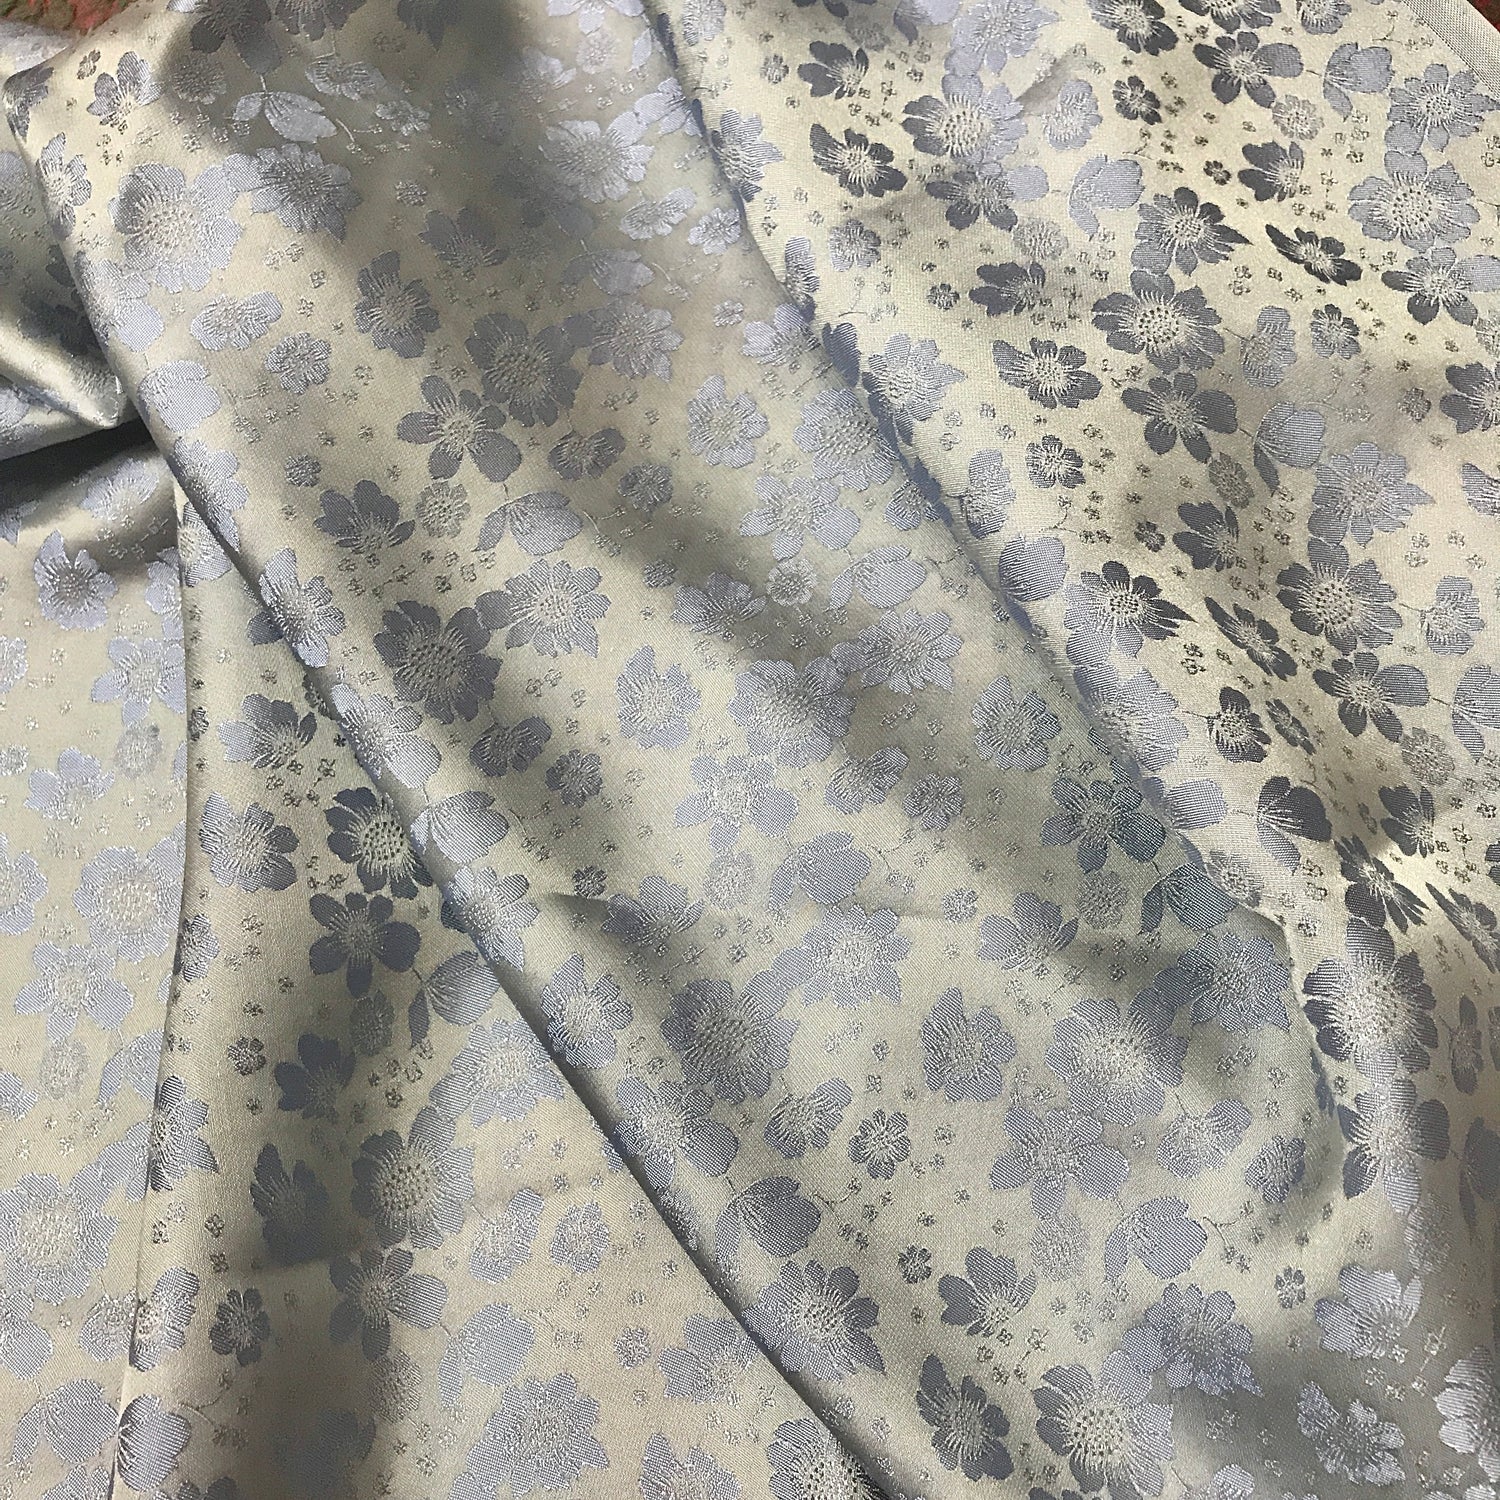 Golden Silk with Grey Flowers - PURE MULBERRY SILK fabric by the yard